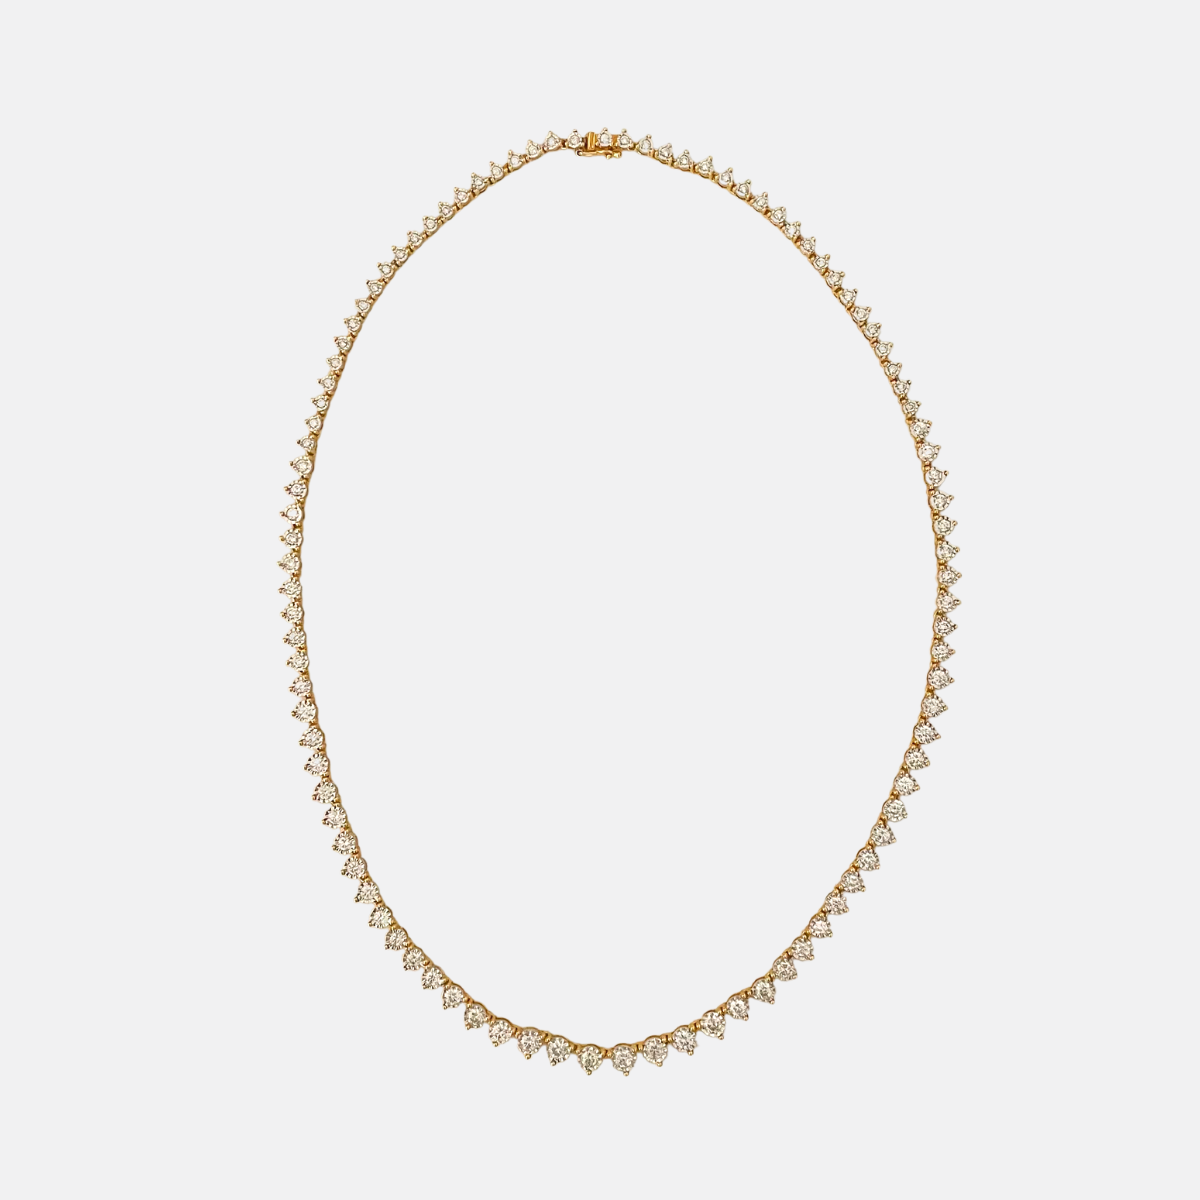 Vintage 18K Yellow Gold Riviera Style Tennis Necklace